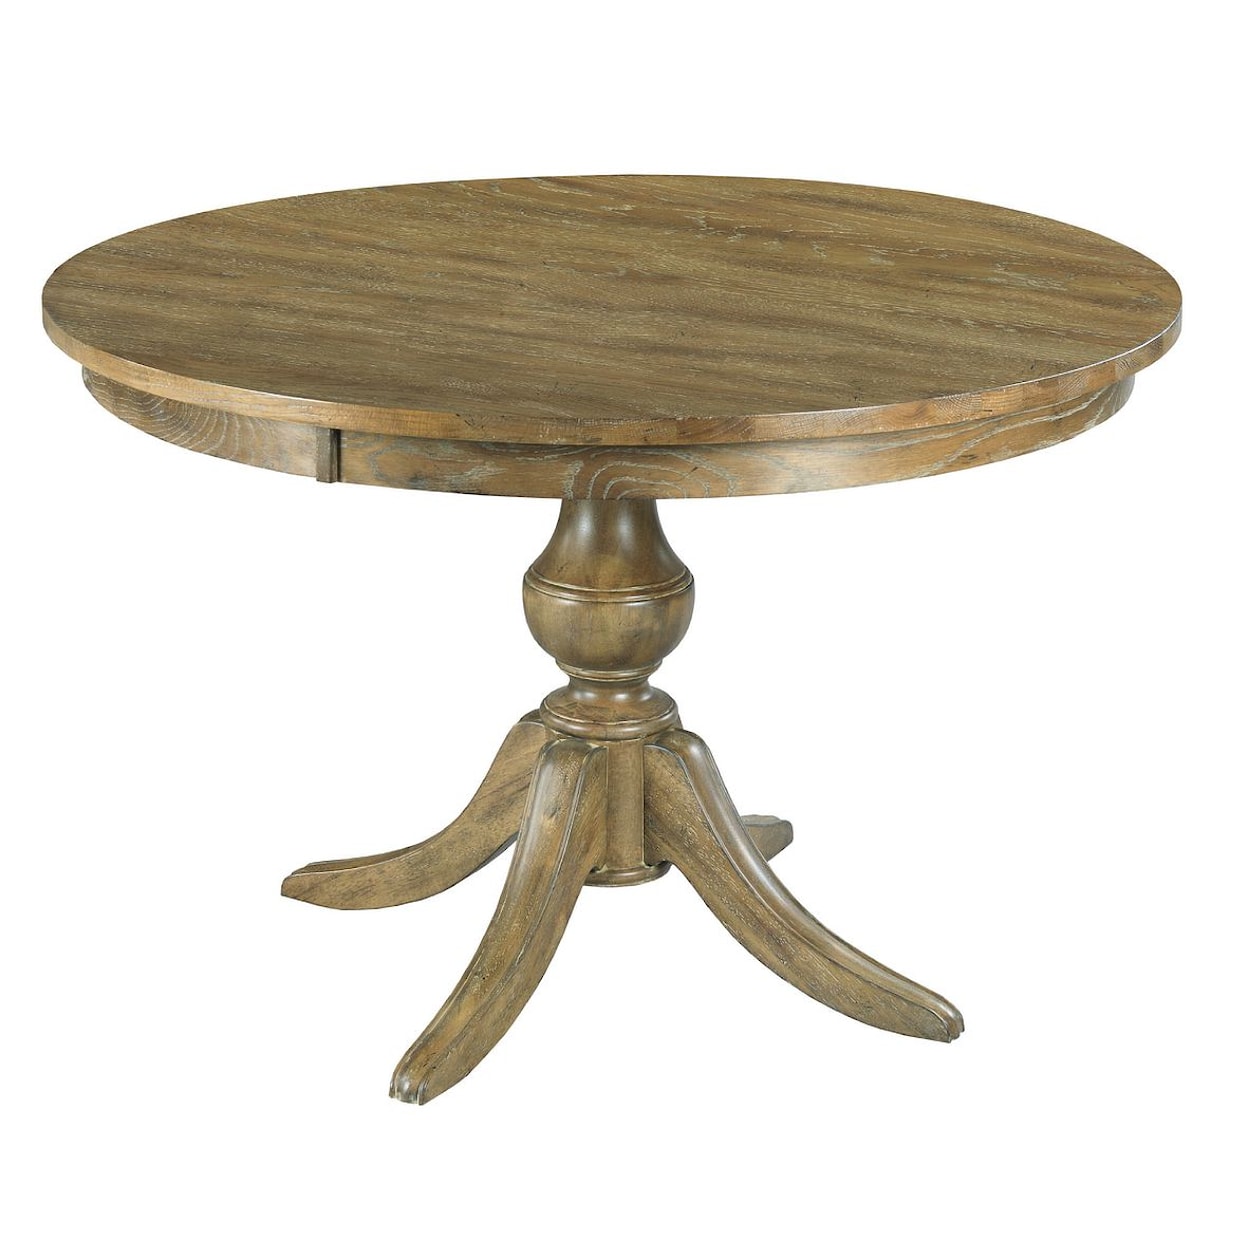 Kincaid Furniture The Nook 44" Round Dining Table w/ Wood Base